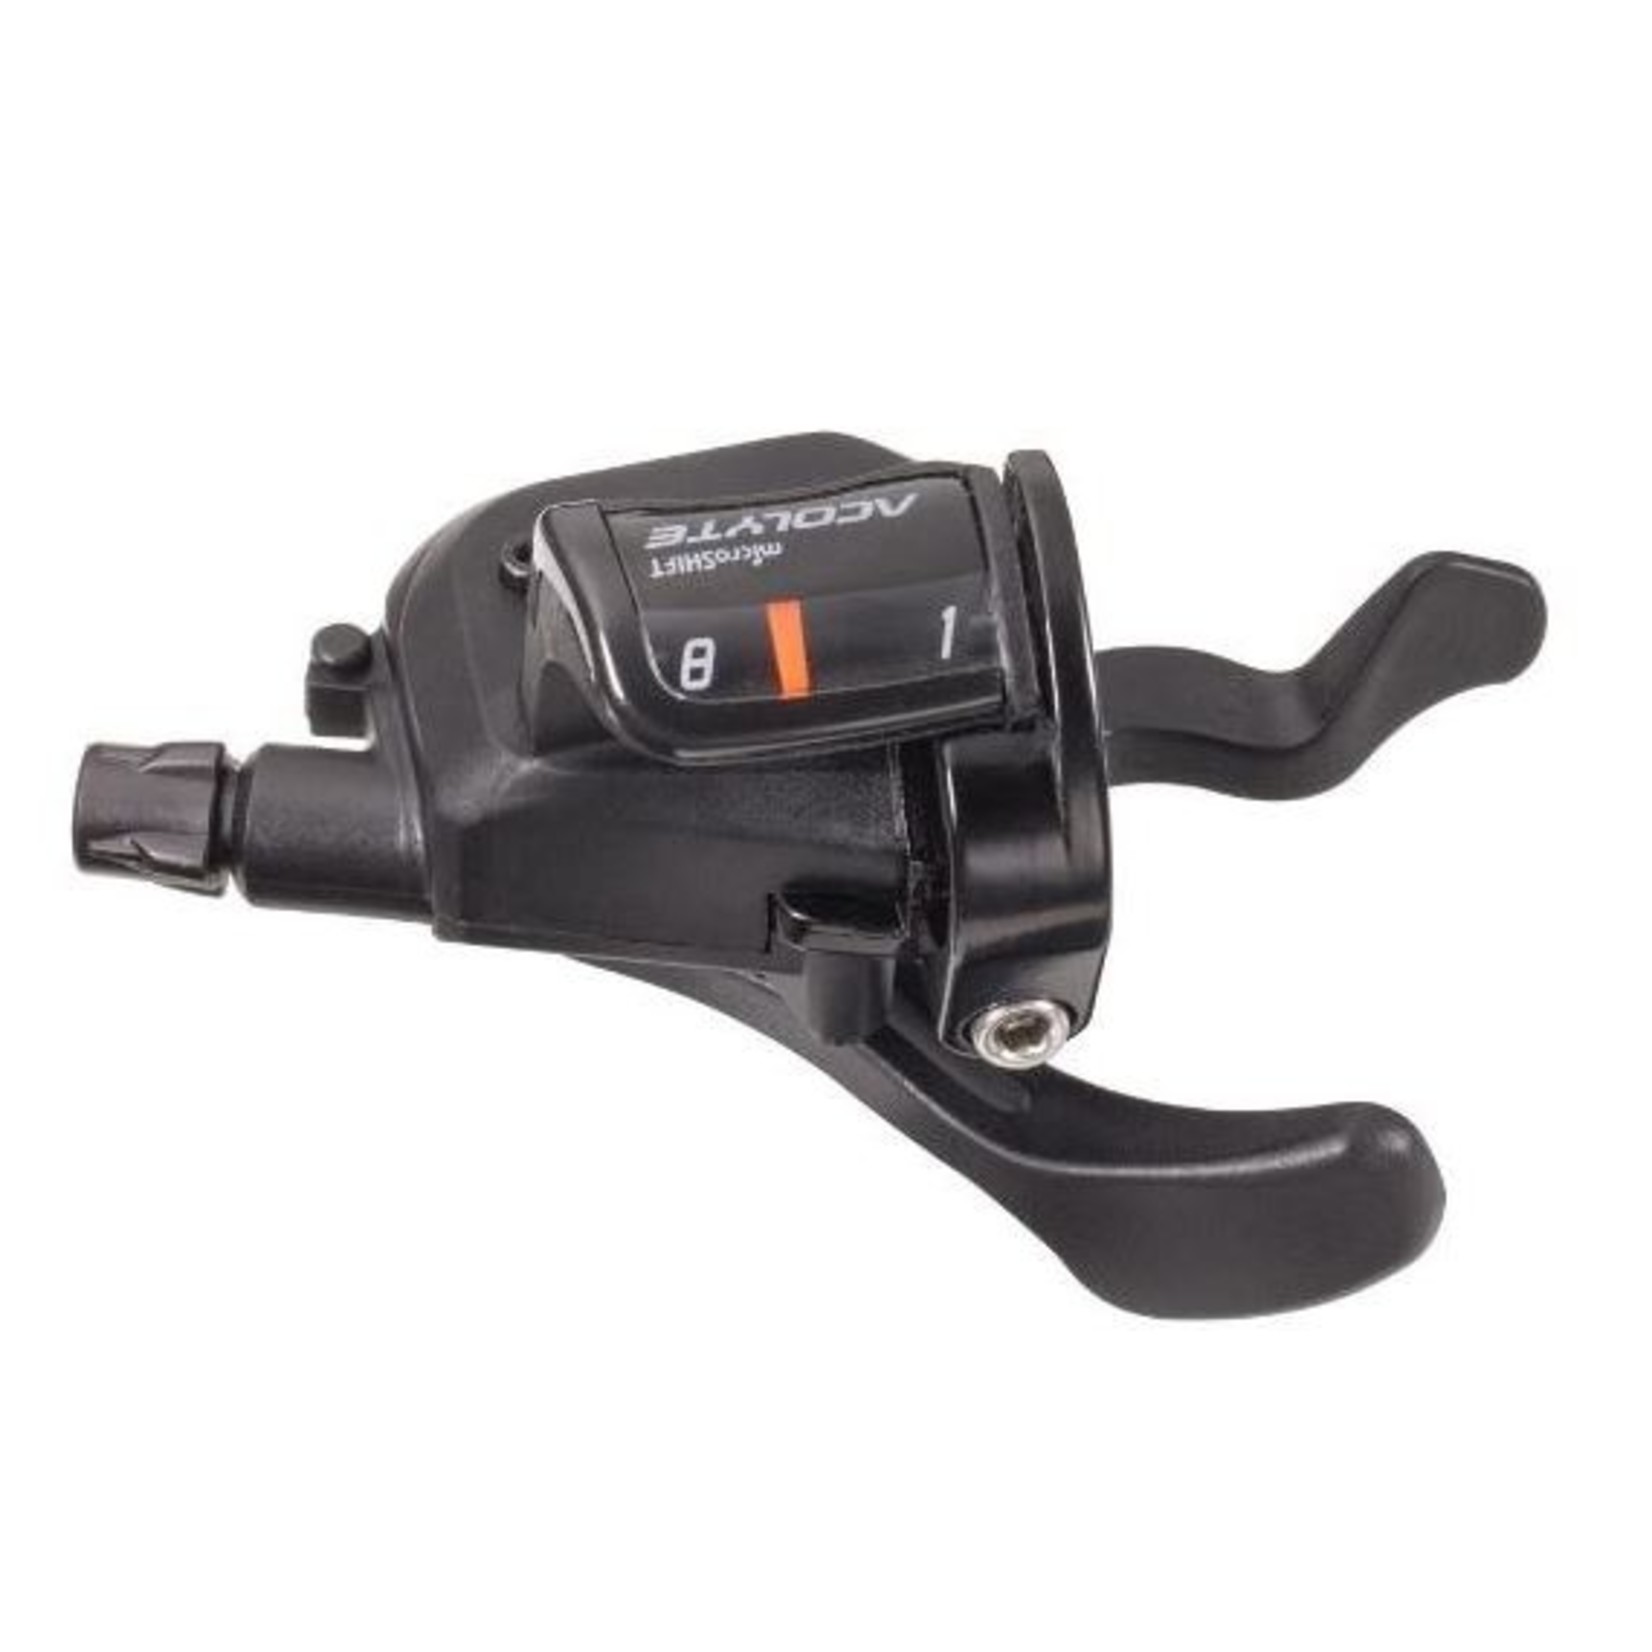 Microshift Microshift Xpress Trigger Right Shifter-ACOLYTE SLM7180-1X8 Speed-Gear Indicator